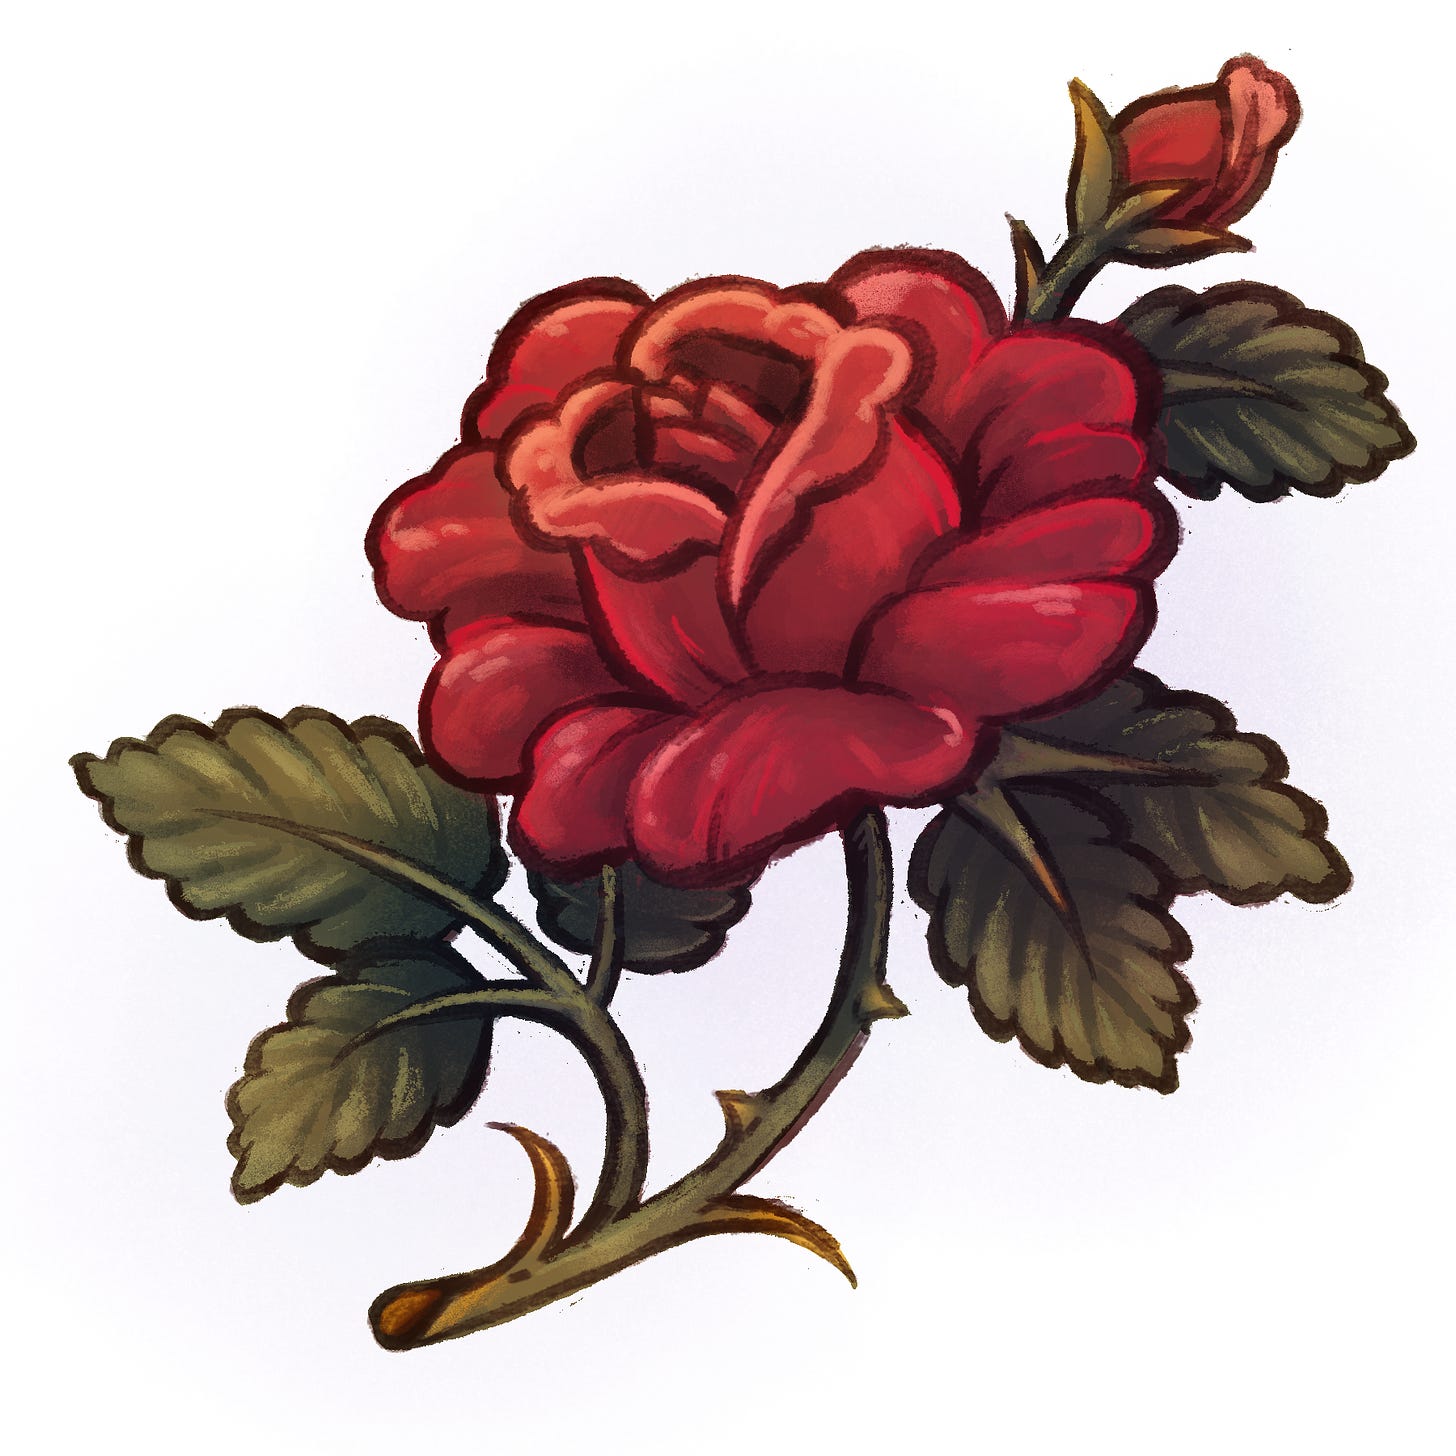 a digital handmade illustration of a stylized red rose.